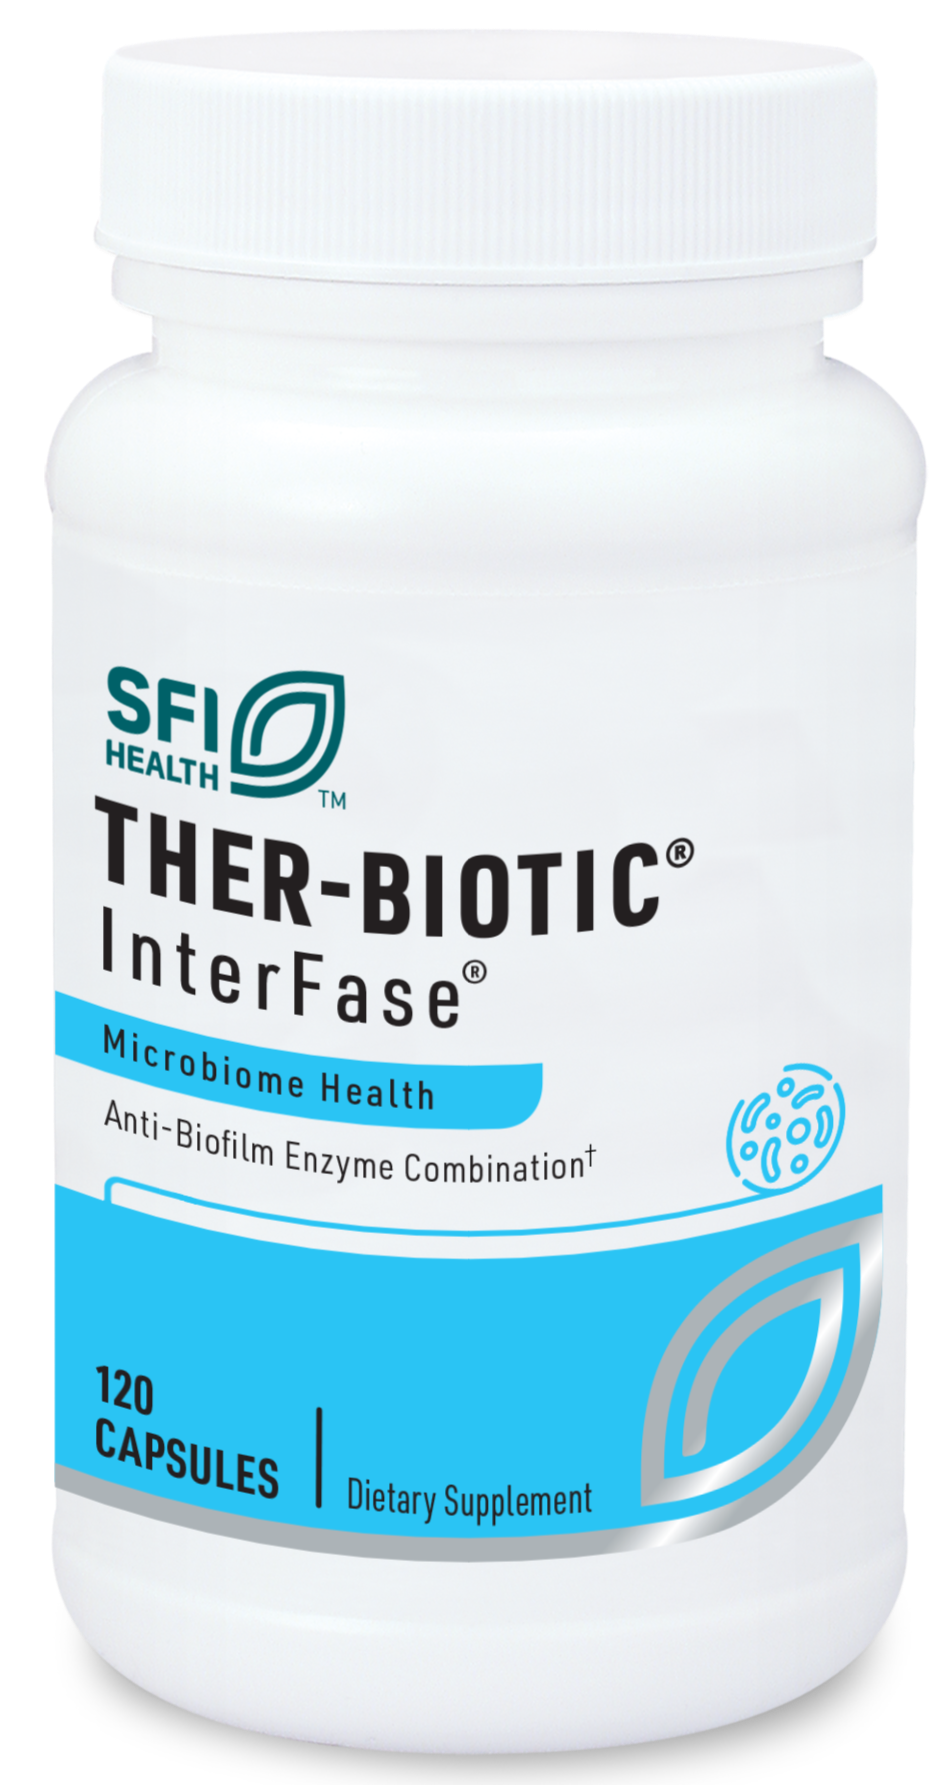 Ther-Biotic InterFase 120ct